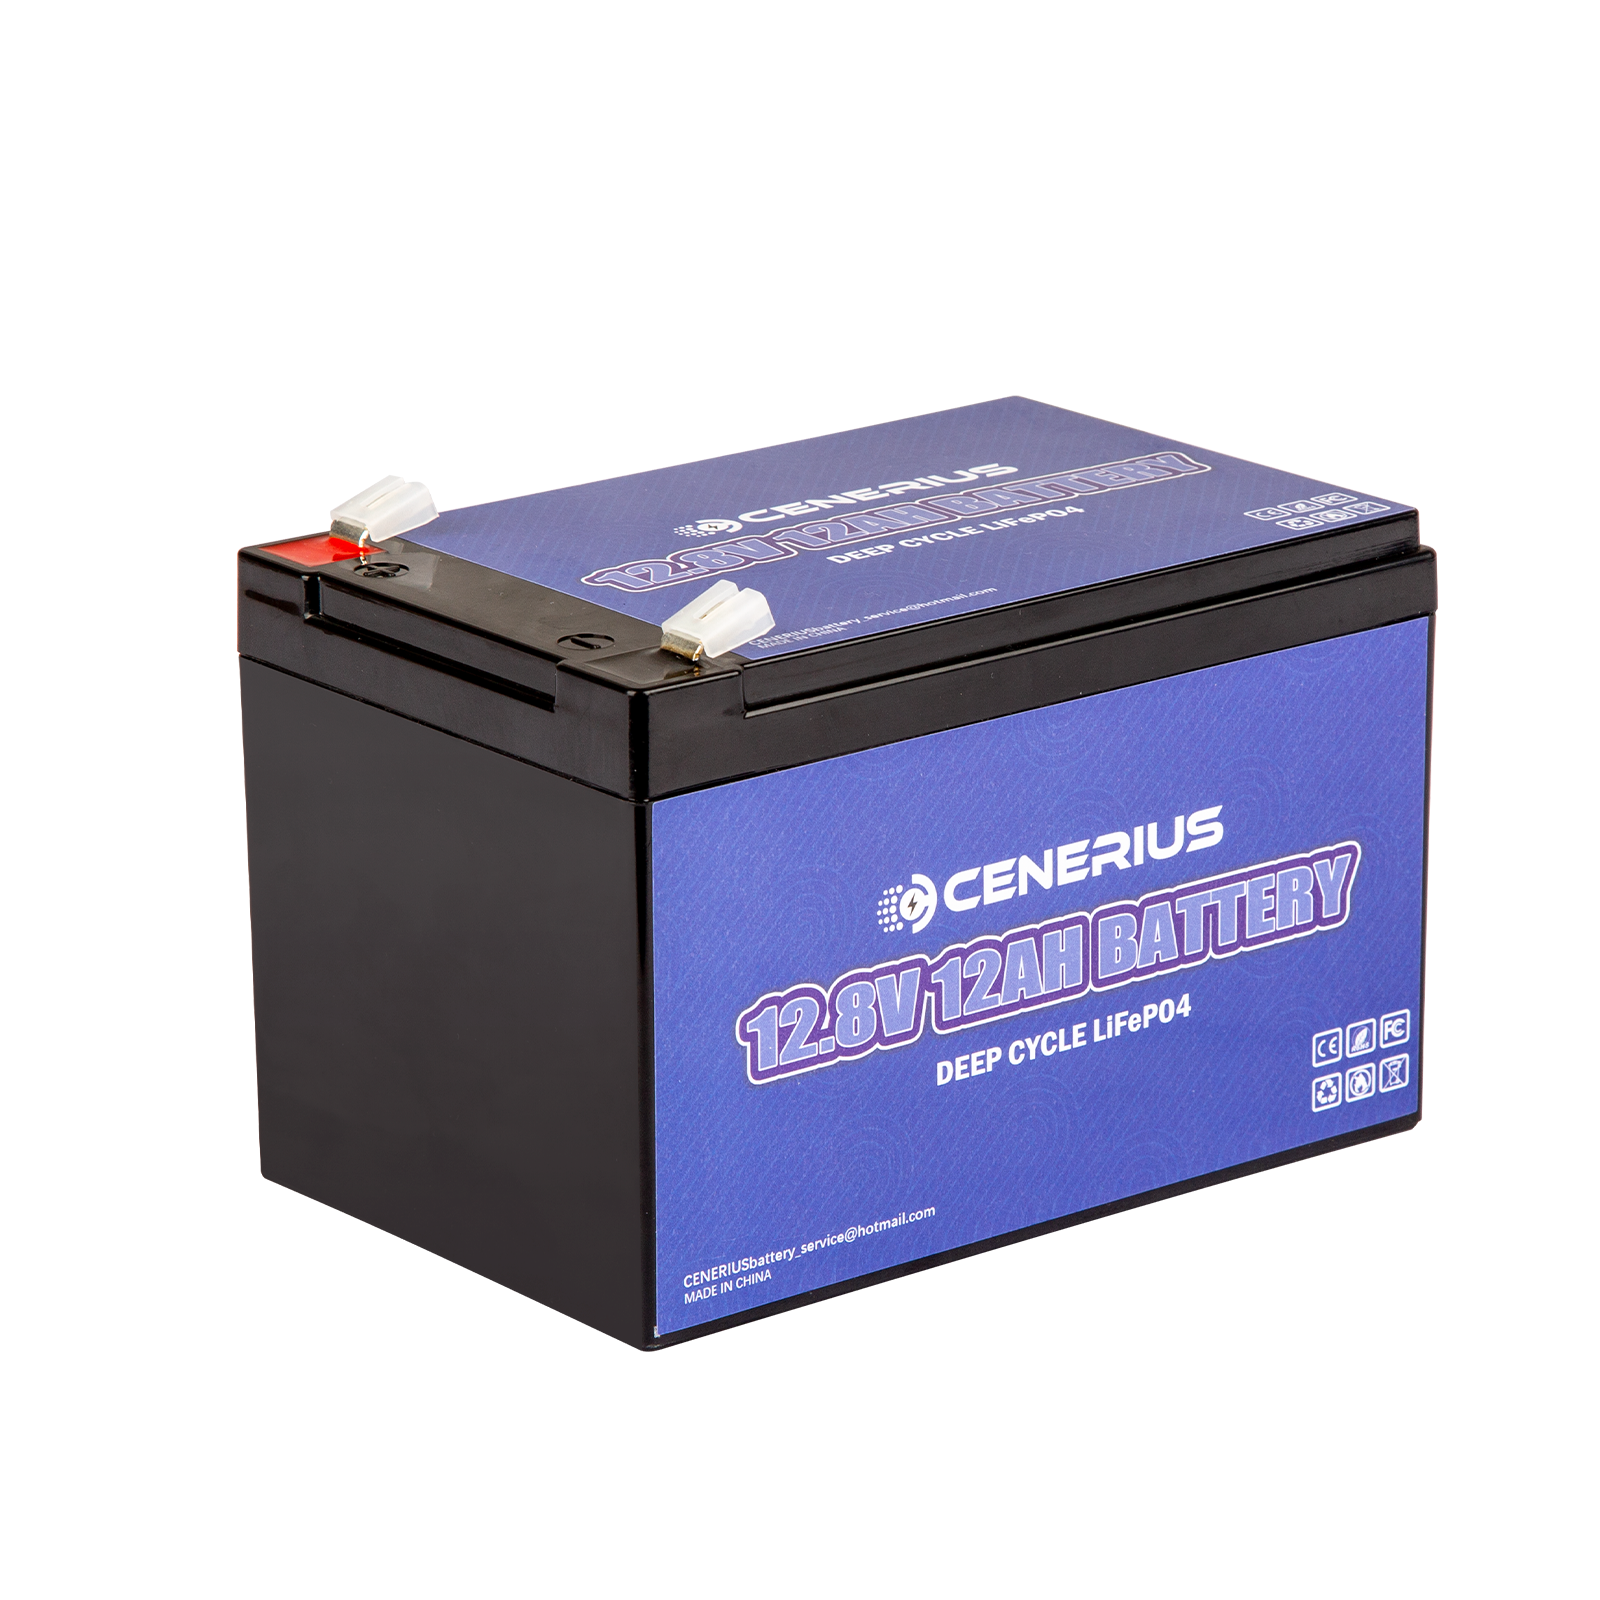 Cenerius 12V 12Ah LiFePO4 Battery, Lithium Battery with BMS, Deep Cycle Rechargeable Battery Up to 4000 Cycles Perfect for Solar System, UPS, Lighting, Scooters, Fish Finders, Power Wheels,Emergency lights, 12V routers, Small ups, Backup power, Outdoor Camping, Power wheels, Riding toys, Kayaks, Air Pumps, Cellular remotes, cameras